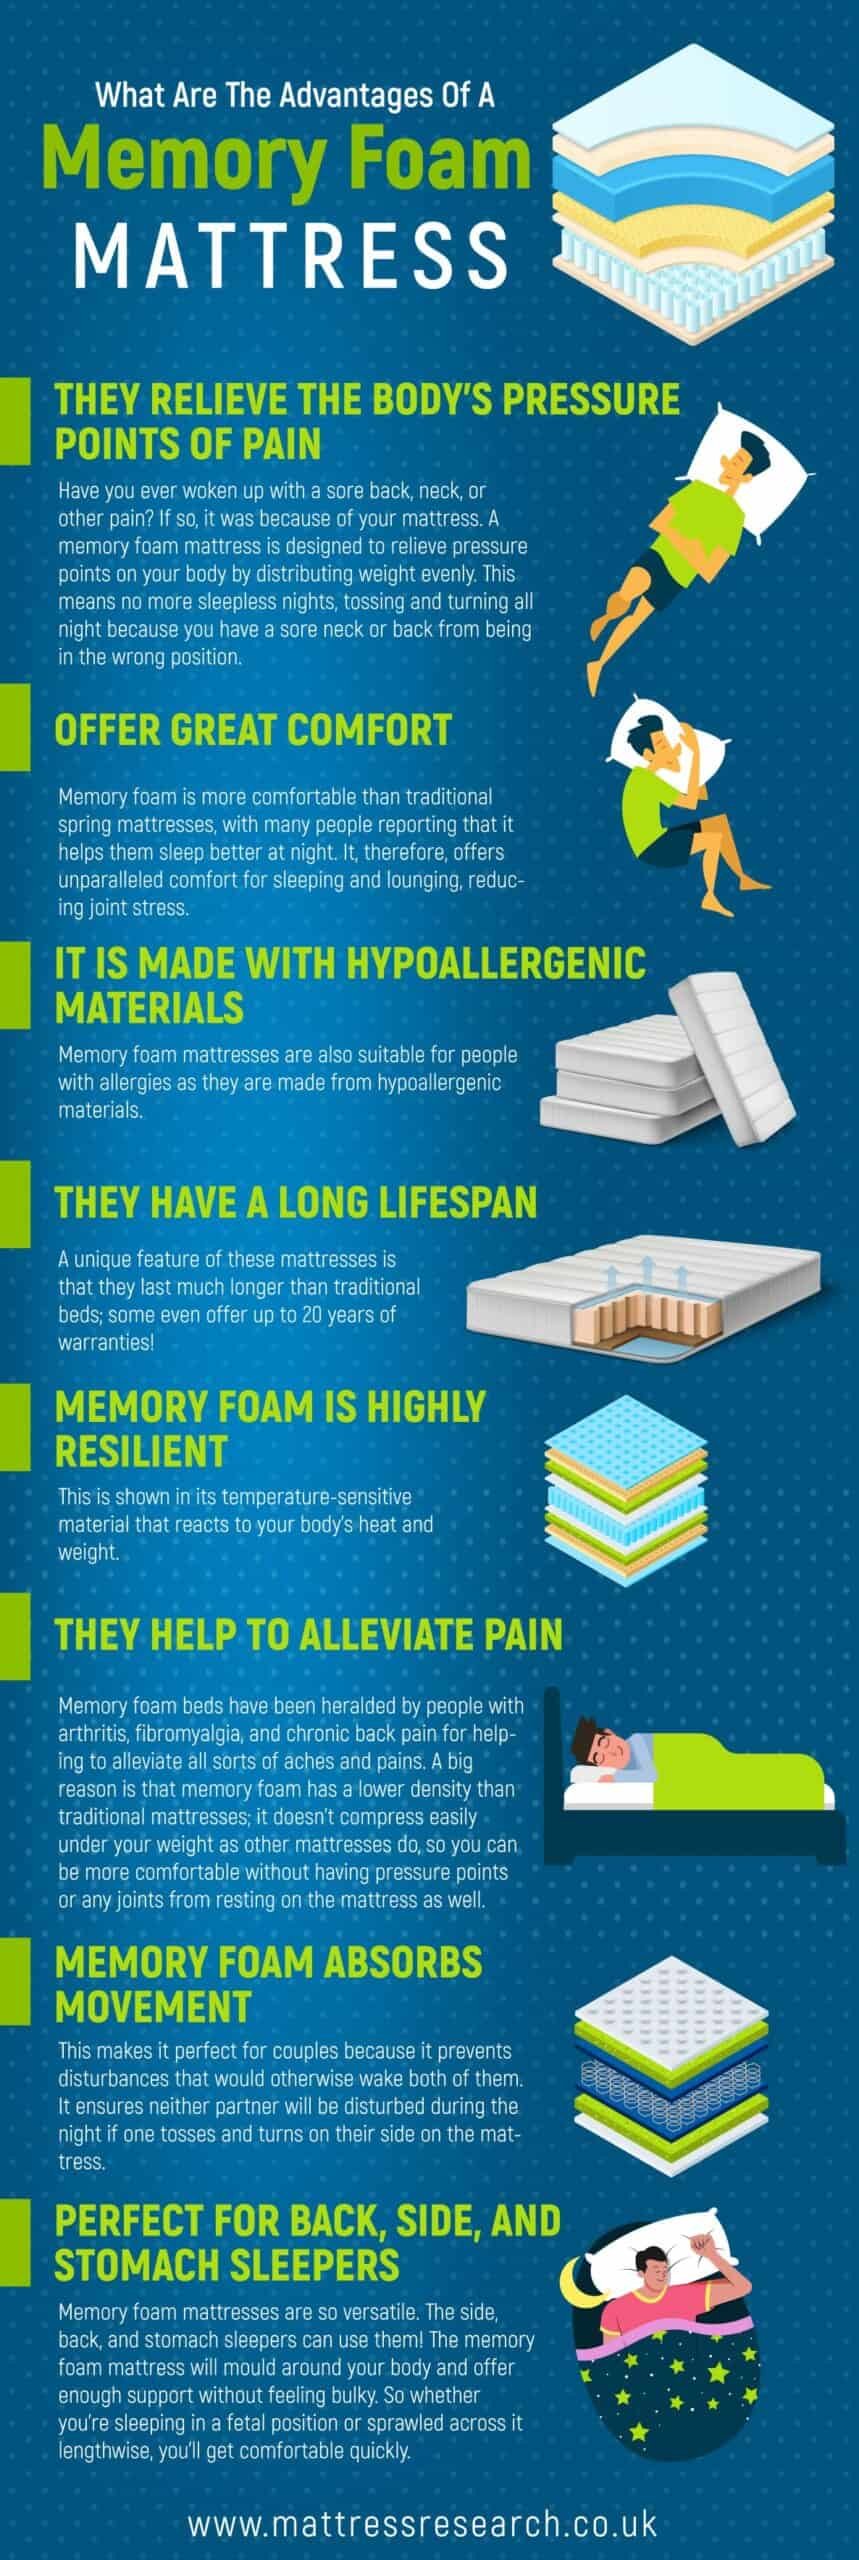 What Are The Advantages Of A Memory Foam Mattress